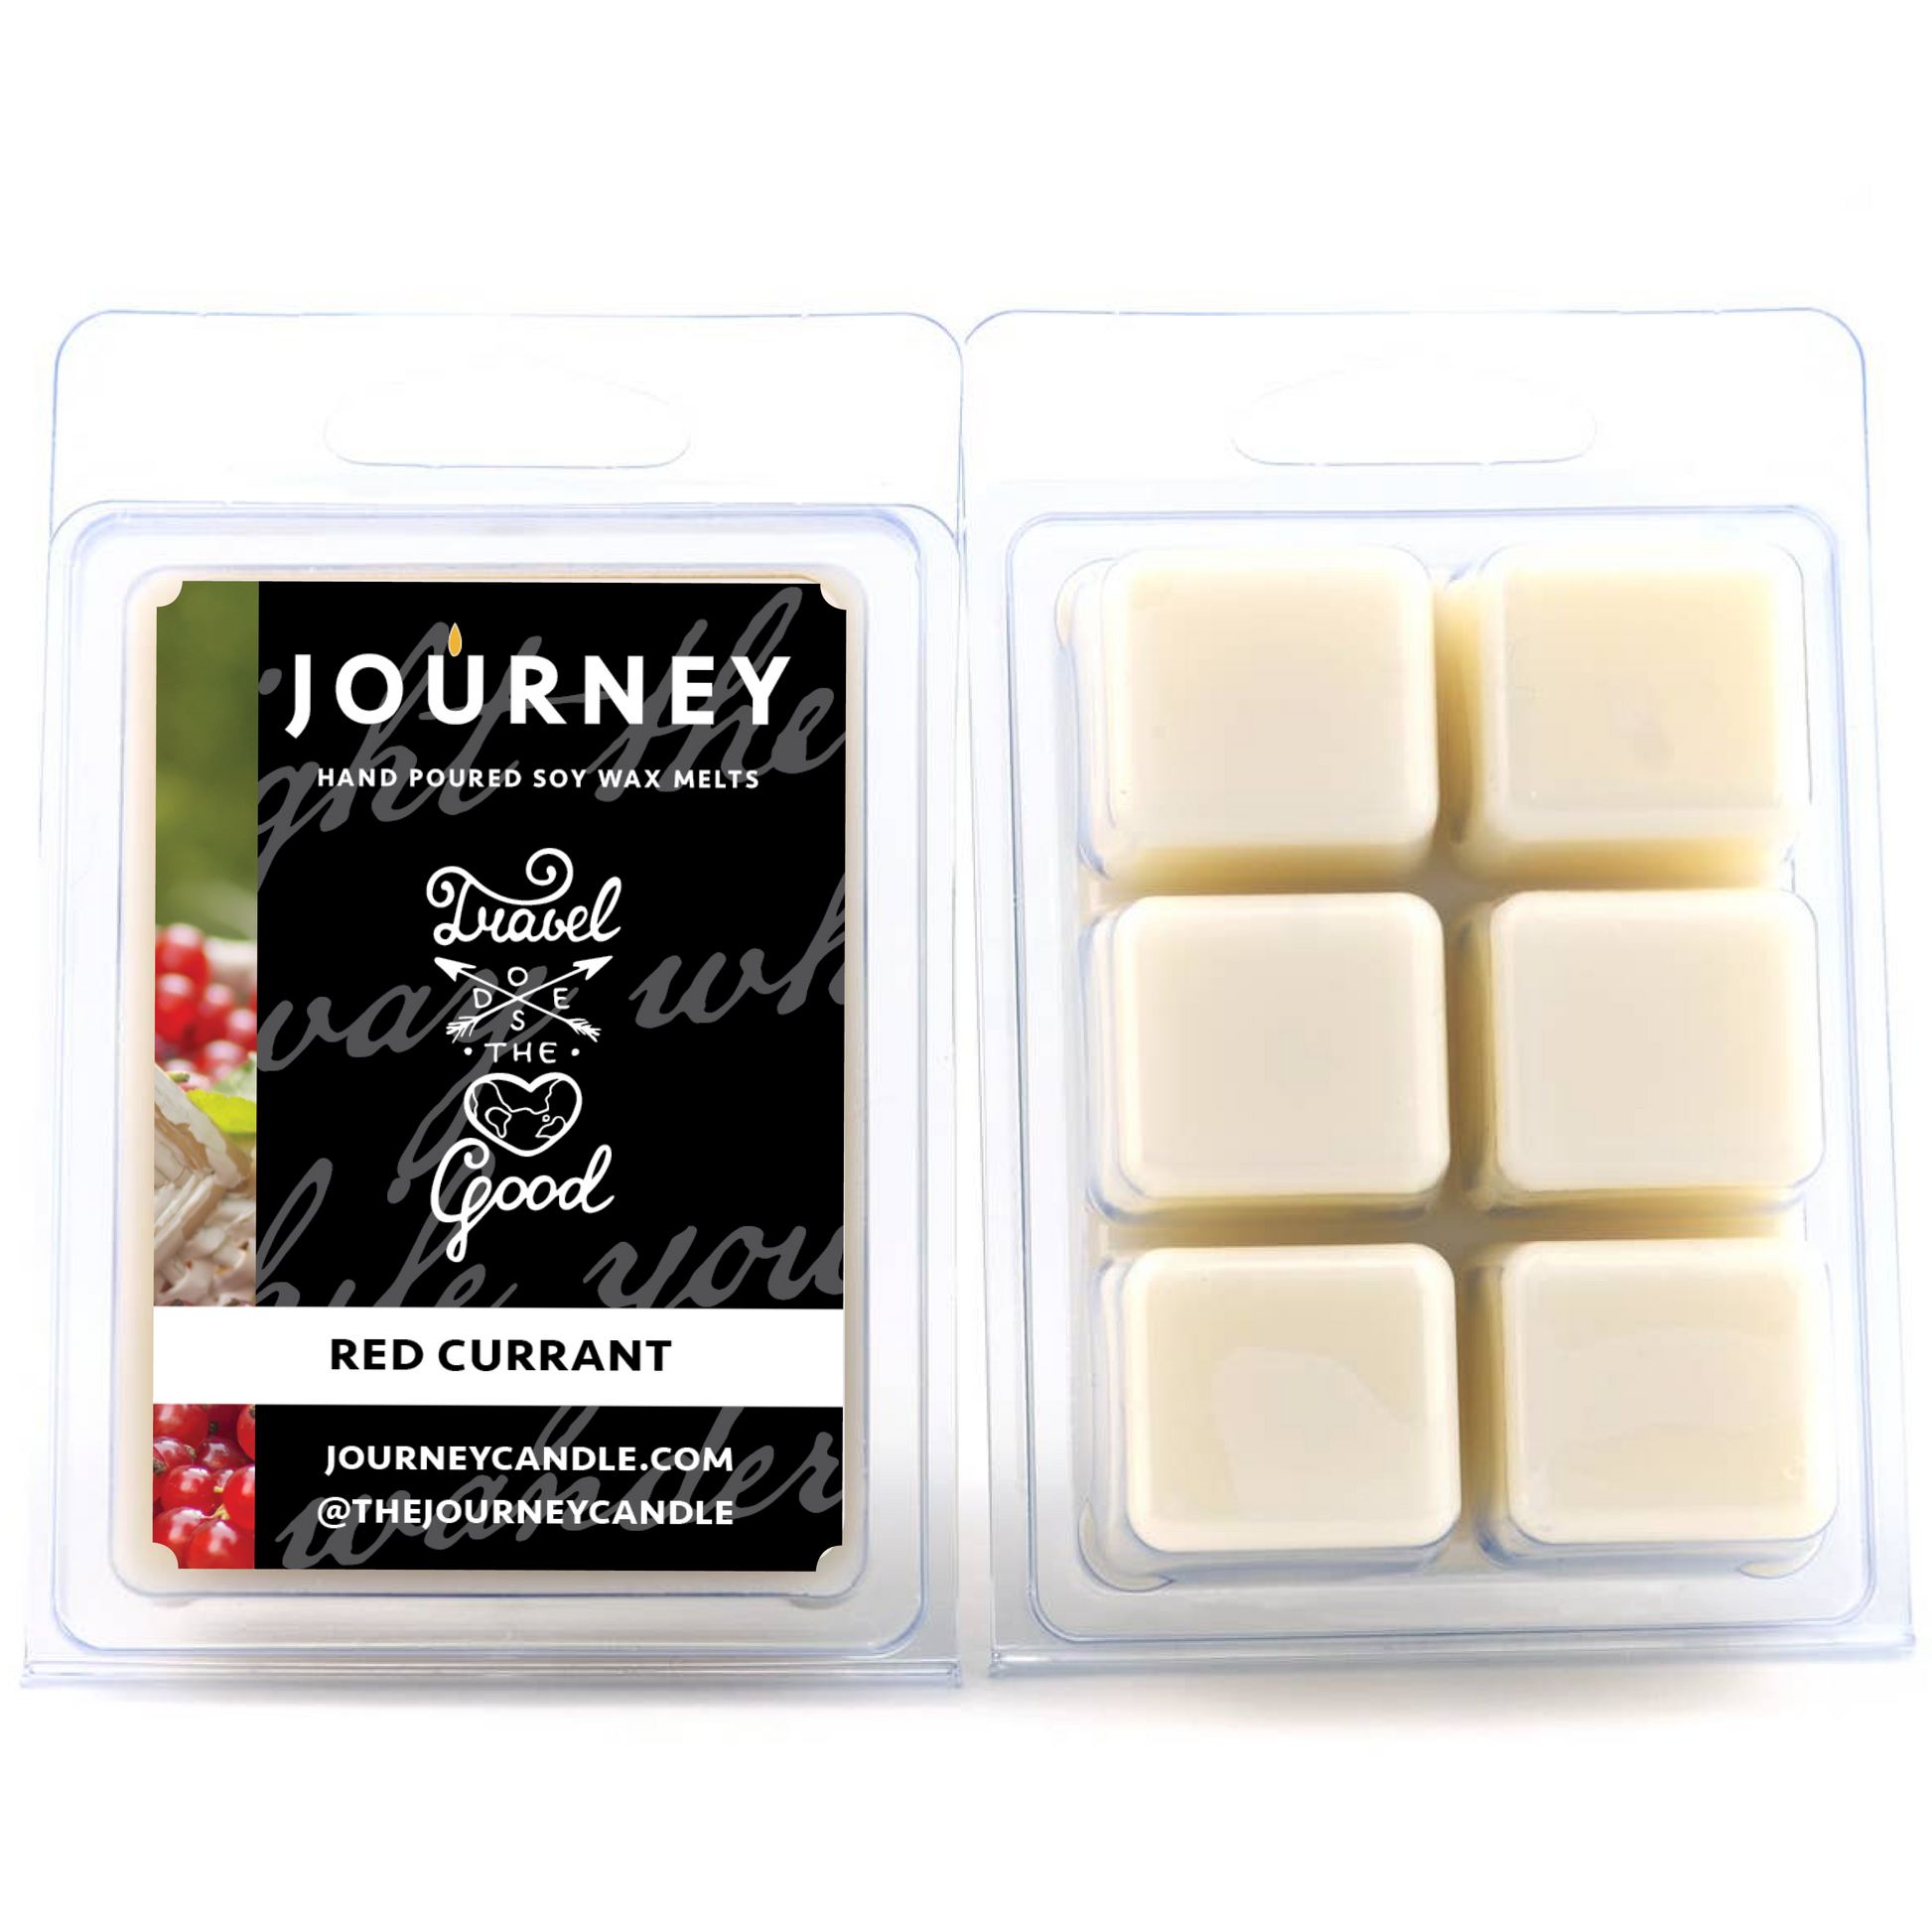 Red Currant Soy Wax Melts – Journey Candle